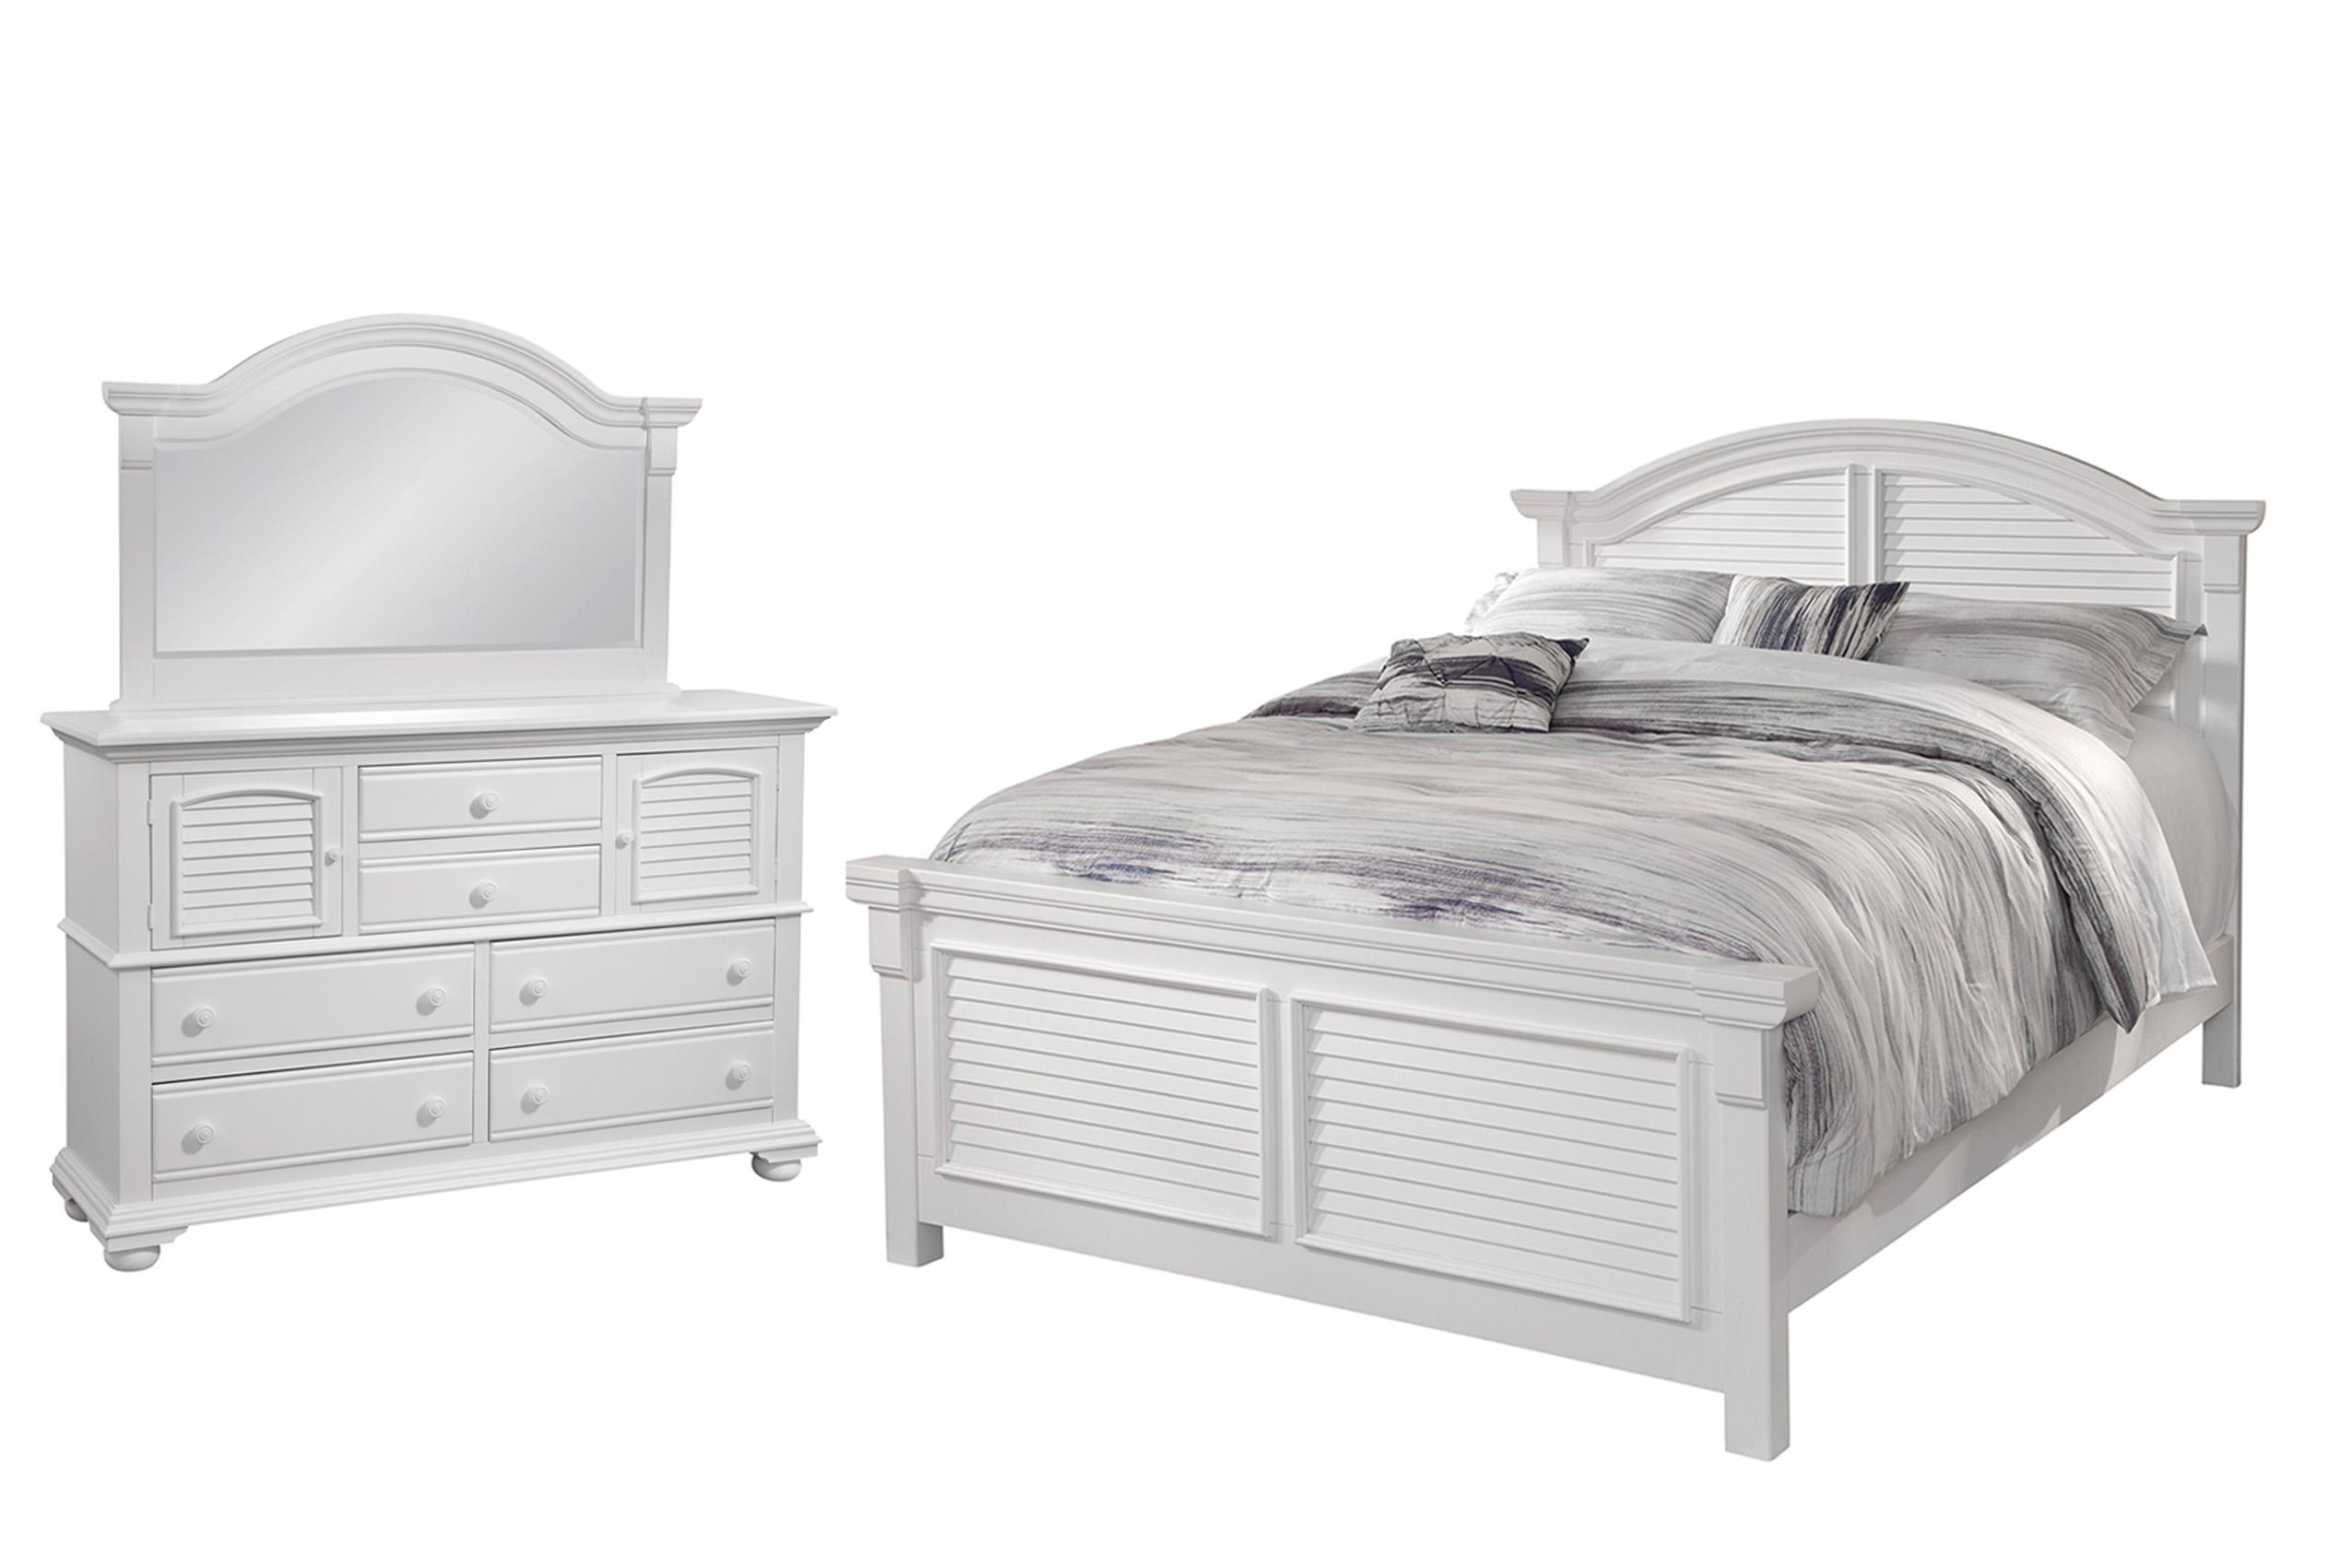 Classic, Traditional, Cottage Panel Bedroom Set COTTAGE 6510-50PAN 6510-QARPN-3PC-Big Way in White 